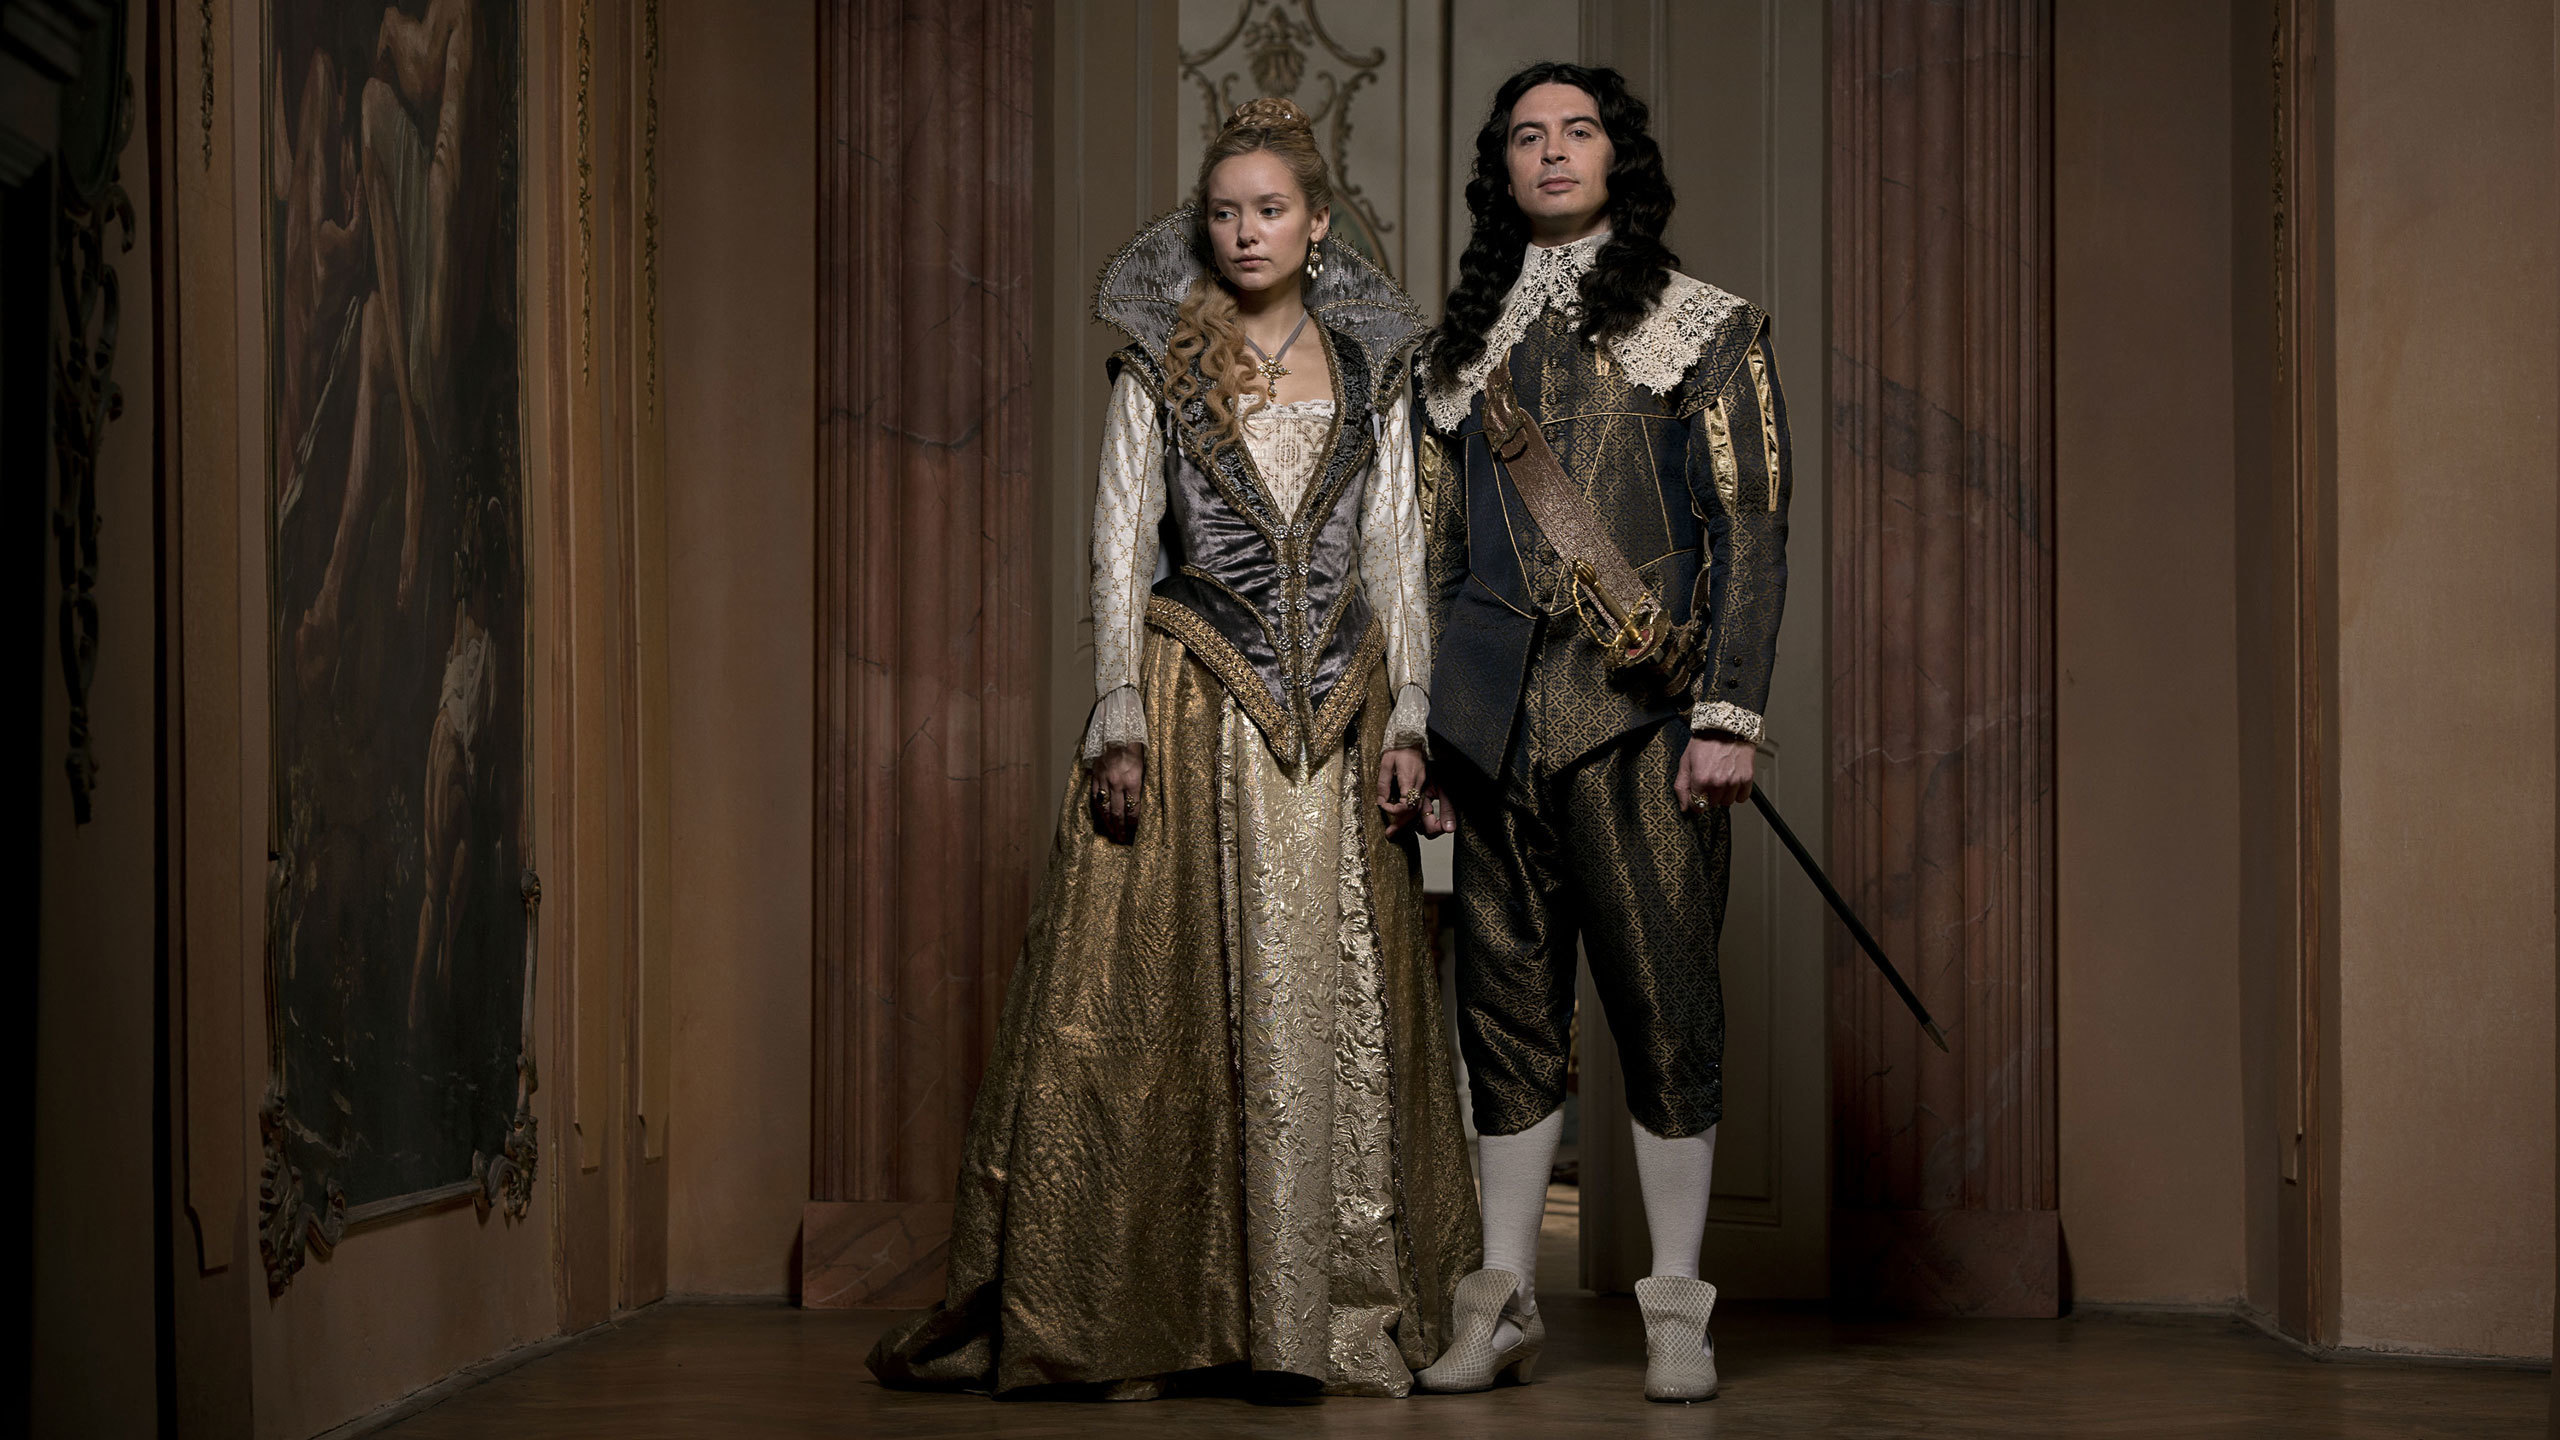 tv show, the musketeers, alexandra dowling